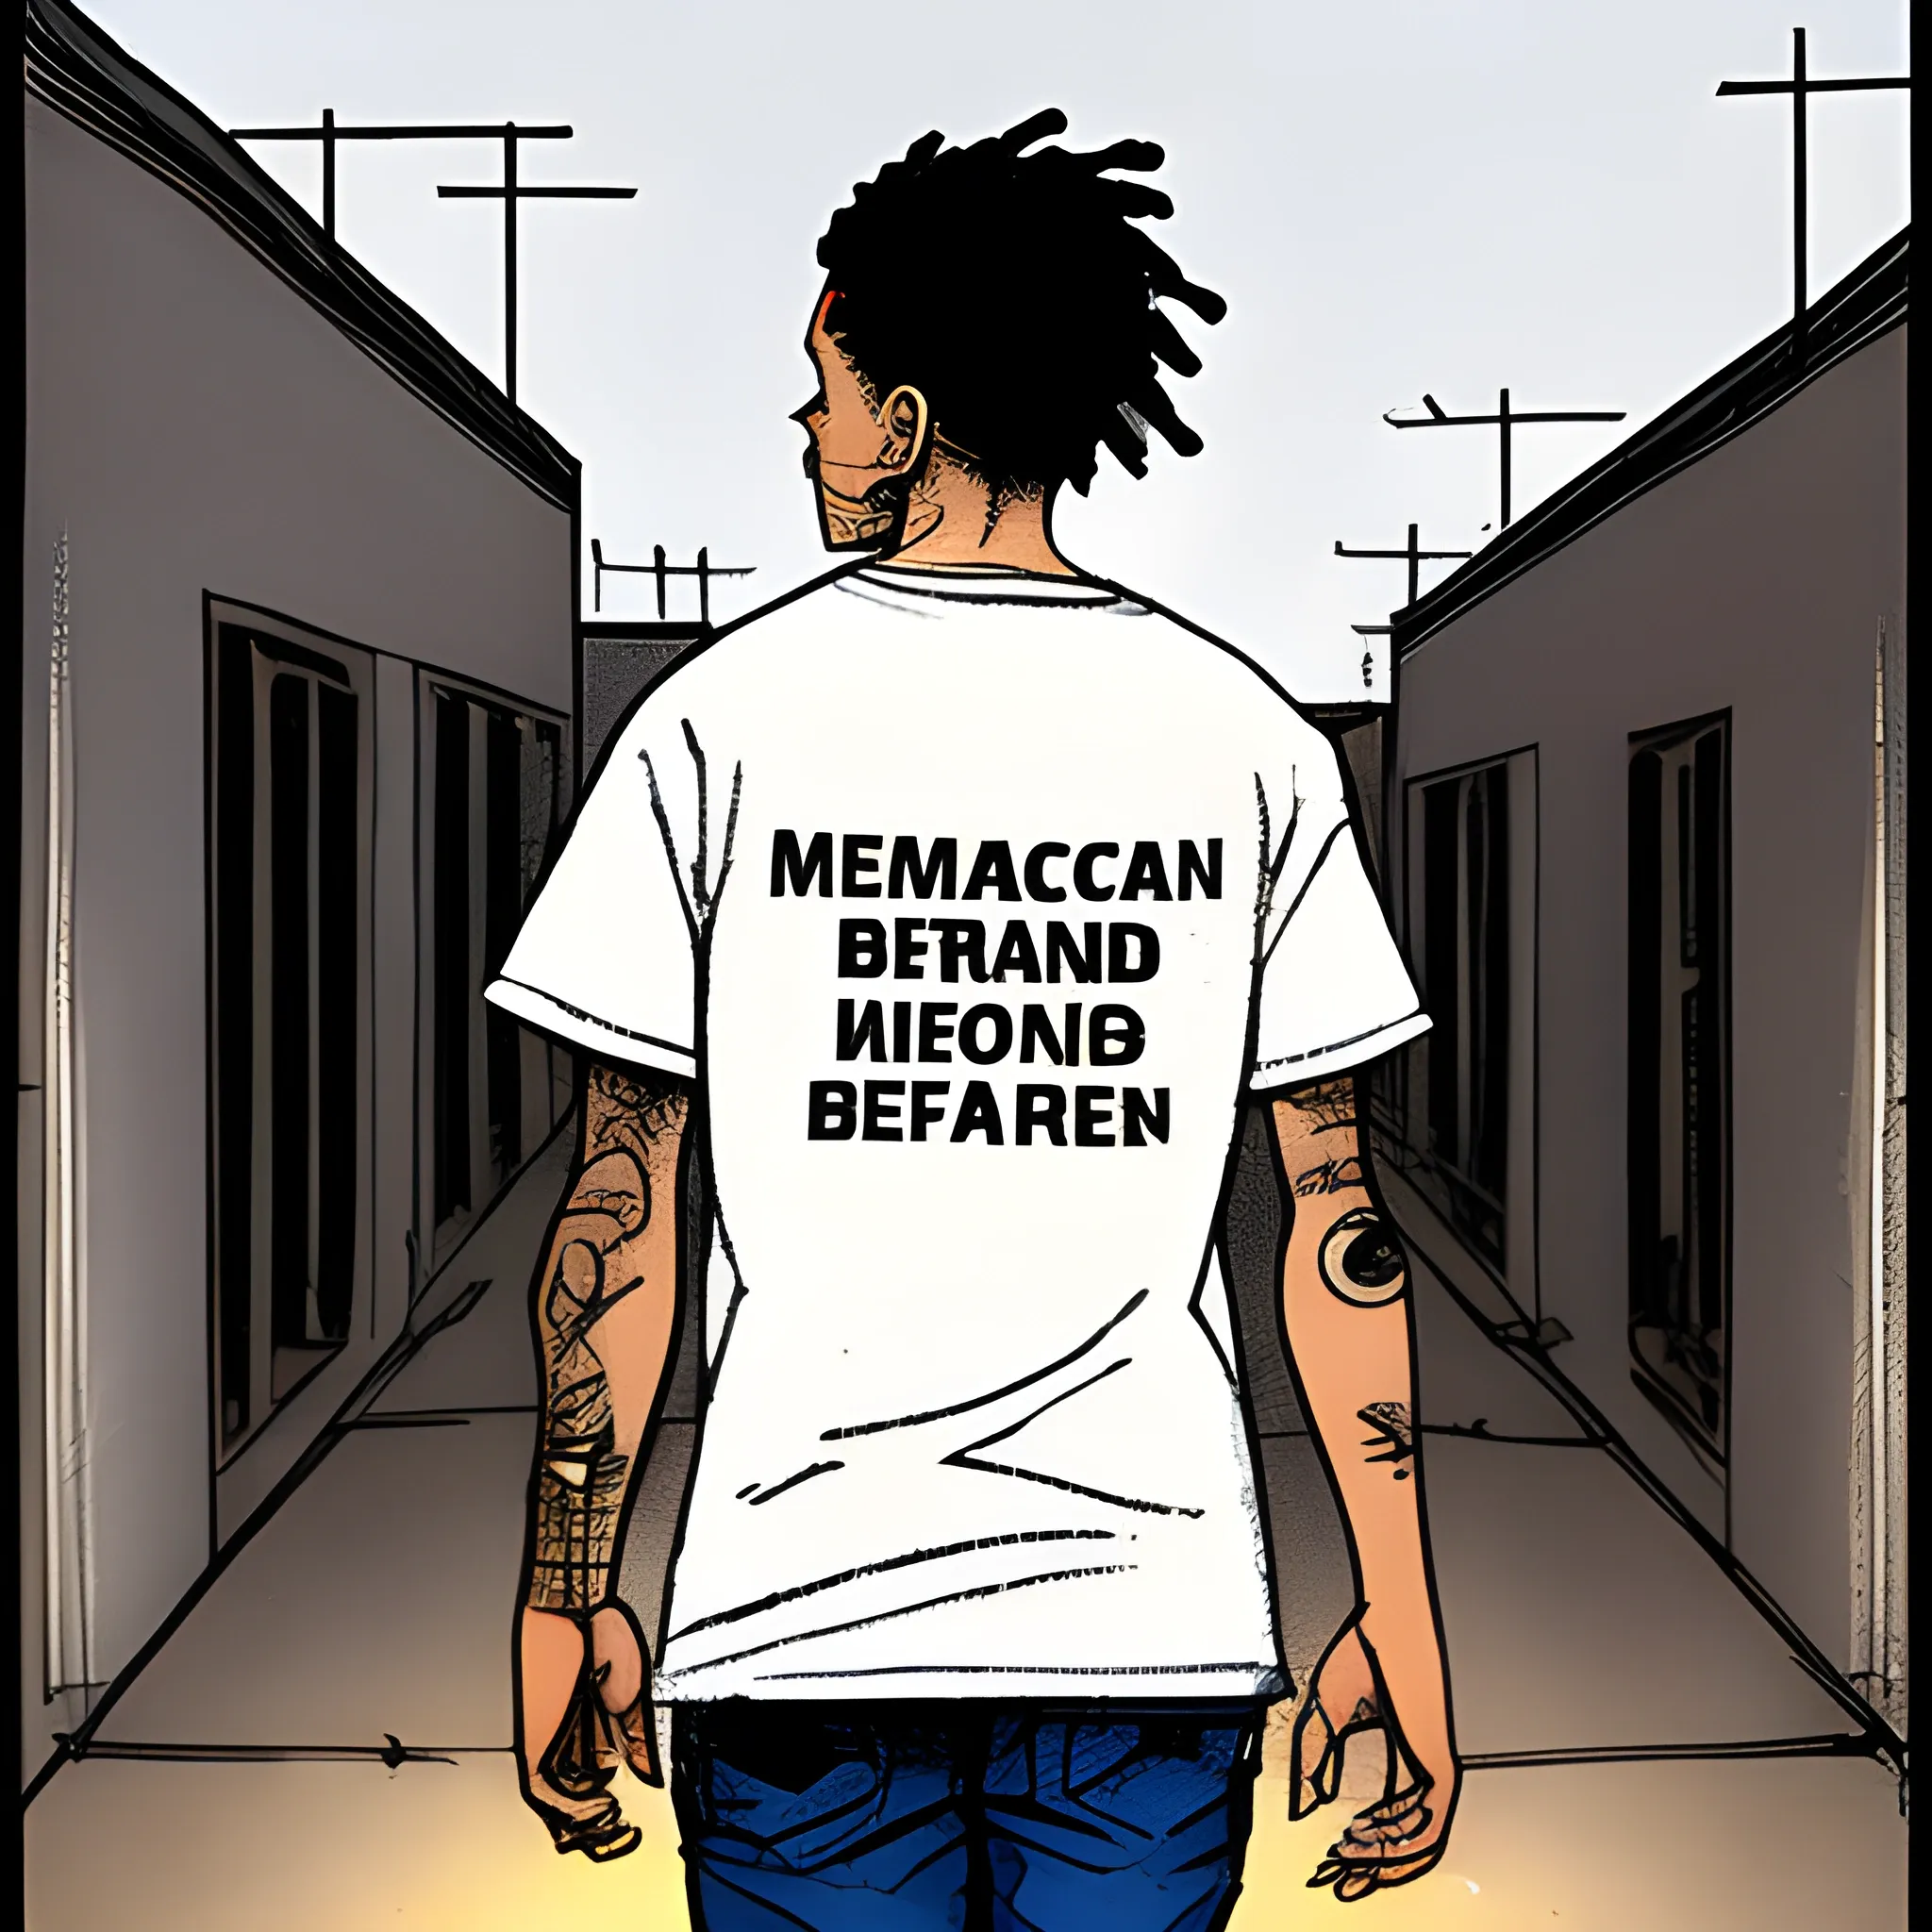 A 21-year-old blood gang member walking backwards through an American housing project, at night.  With the words "Moving Backwards" written on his t-shirt in English.  Cartoon

